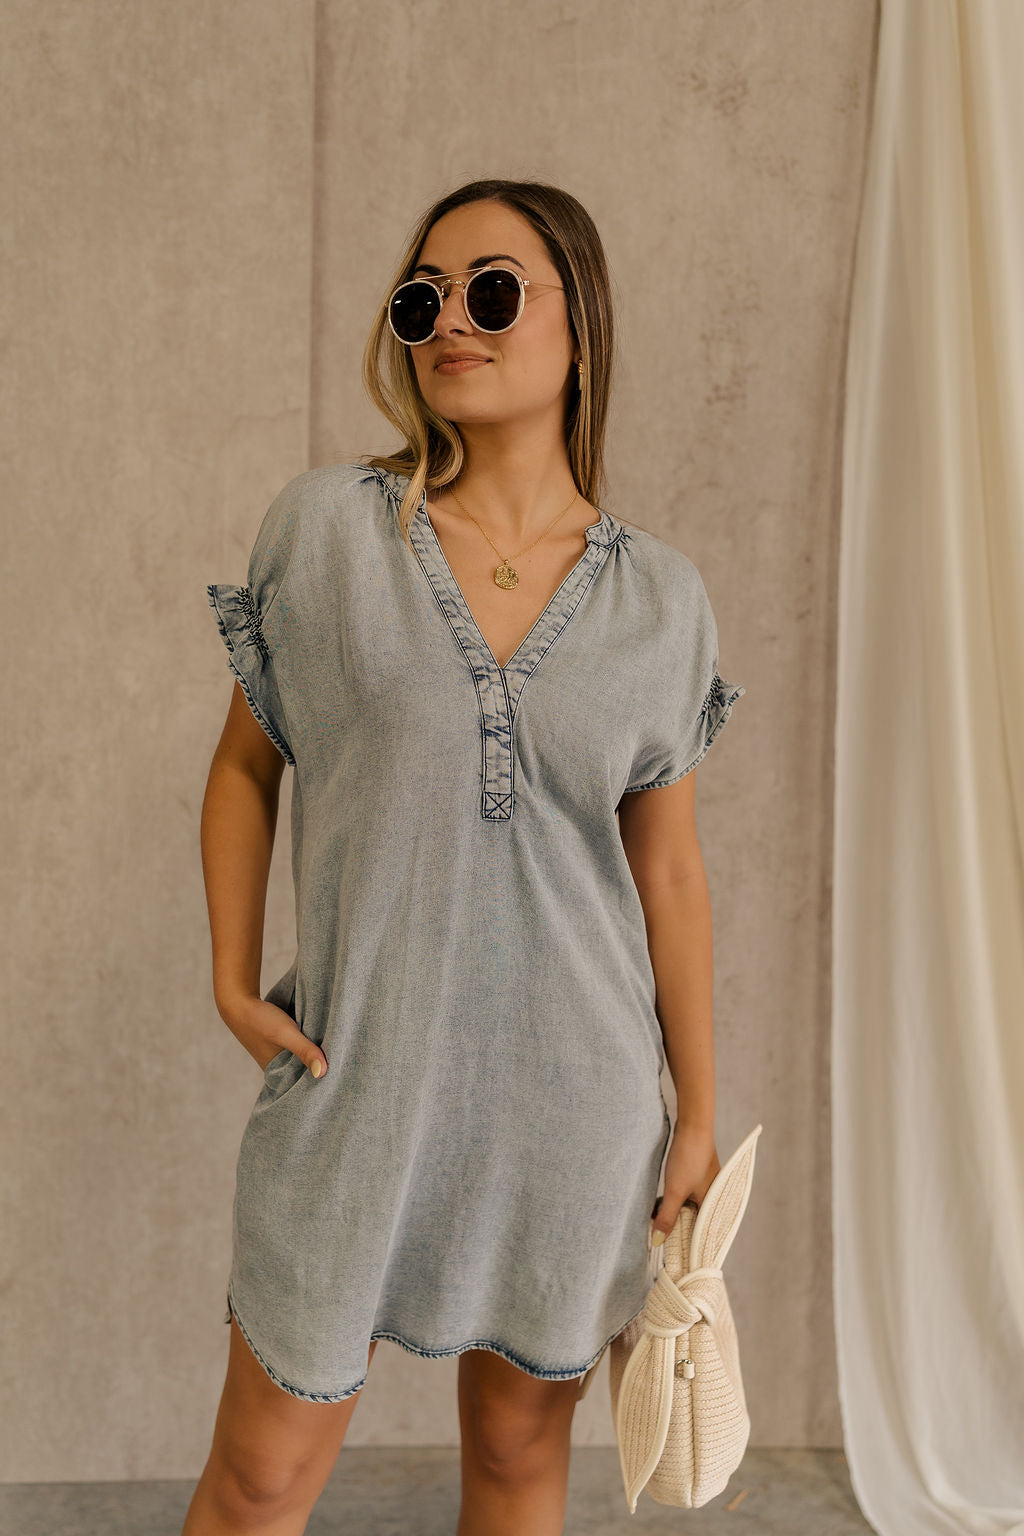 Front view of female model wearing the Leah Denim Wash Tencel Mini Dress which features denim blue tencel fabric, mini length, two side slit pockets, a round neckline with a v-cutout, an elastic band in the back, and short sleeves with elastic hems and ruffle details.